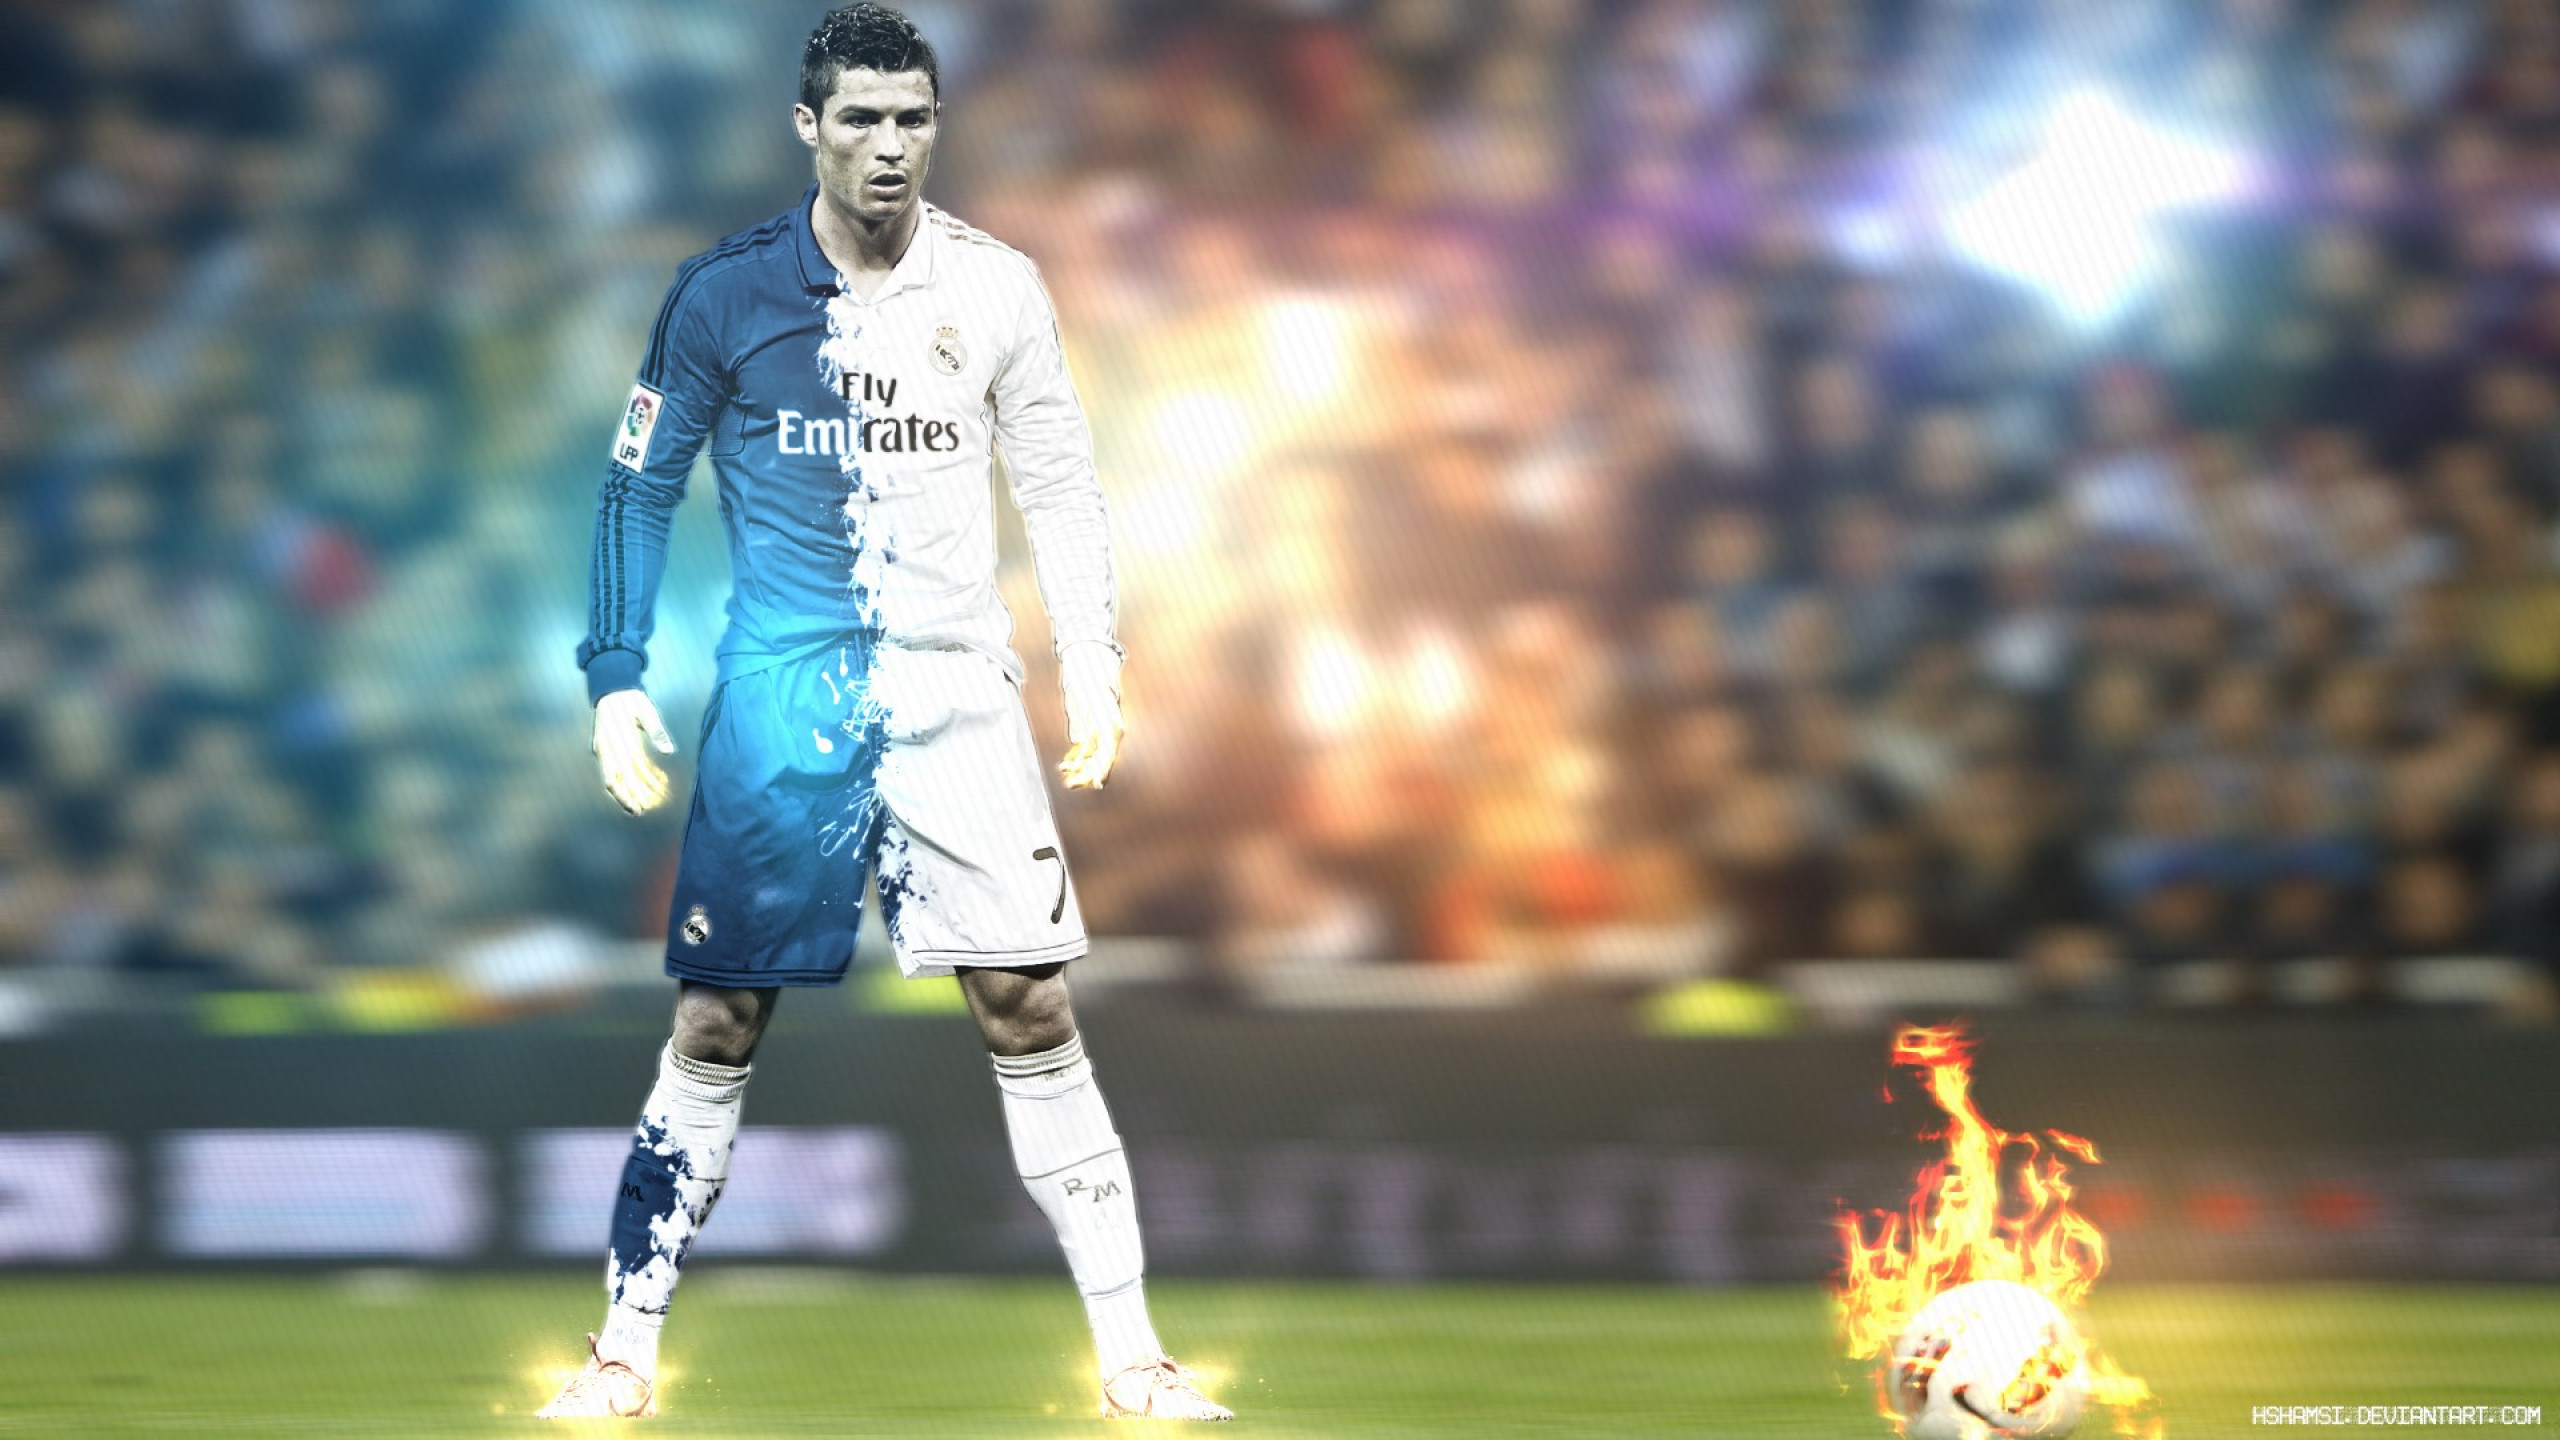 cr7 hd wallpapers 1080p,player,football player,soccer player,sport venue,sports equipment